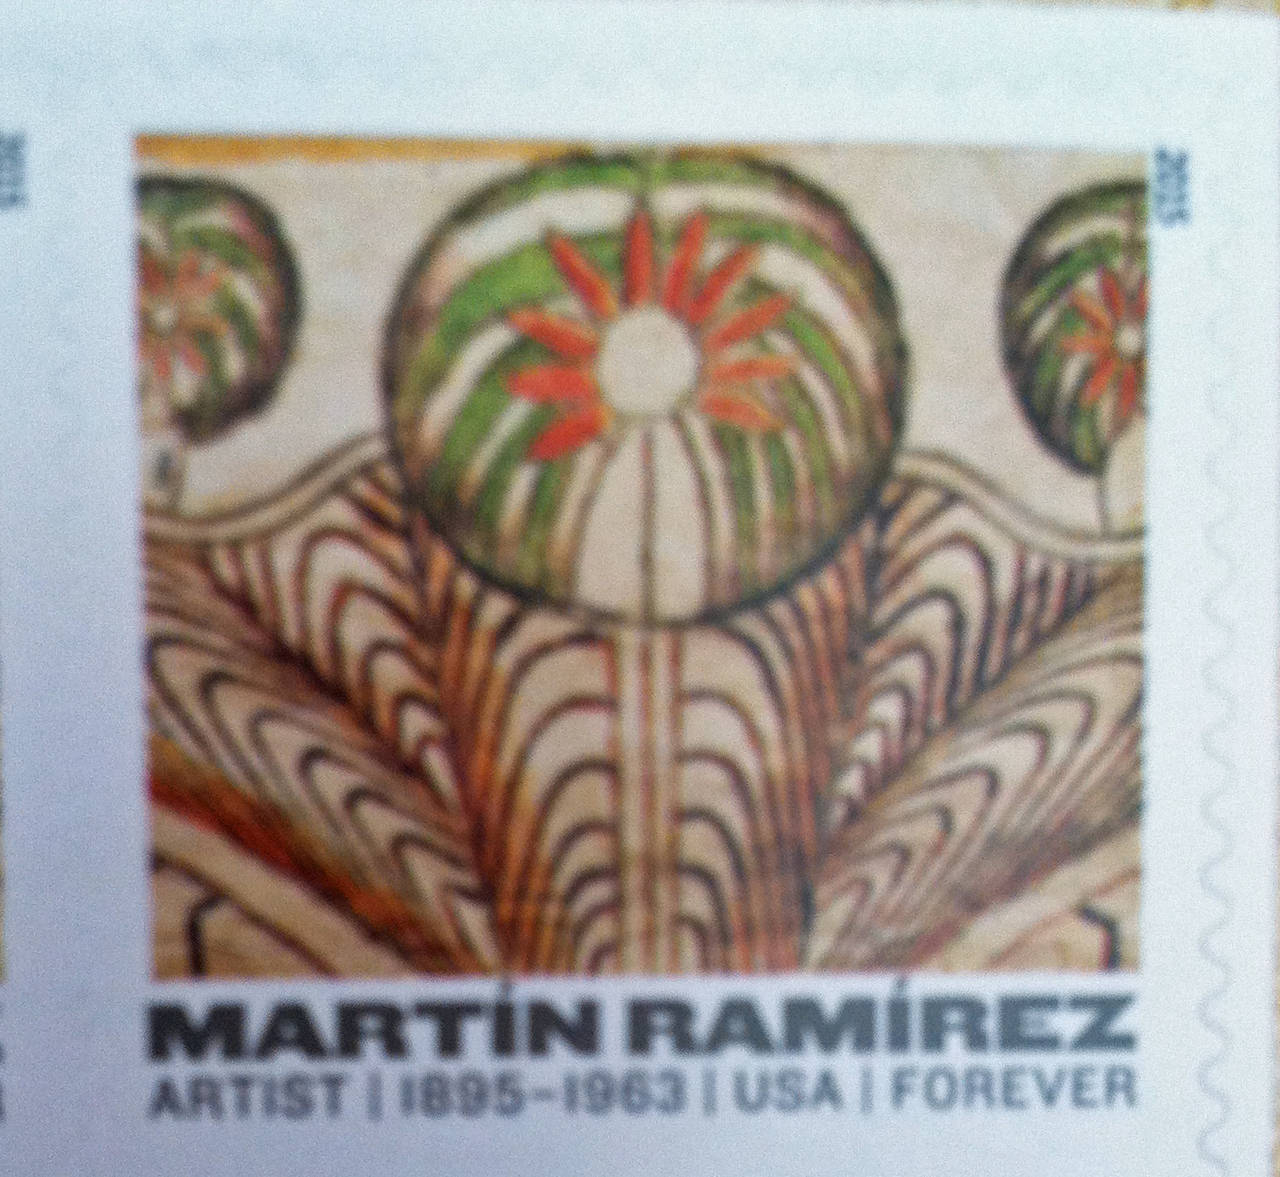 Now seen on the top row of the new Martin Ramirez USPS Forever Stamp released in March, 2015. Please see the second image.

53